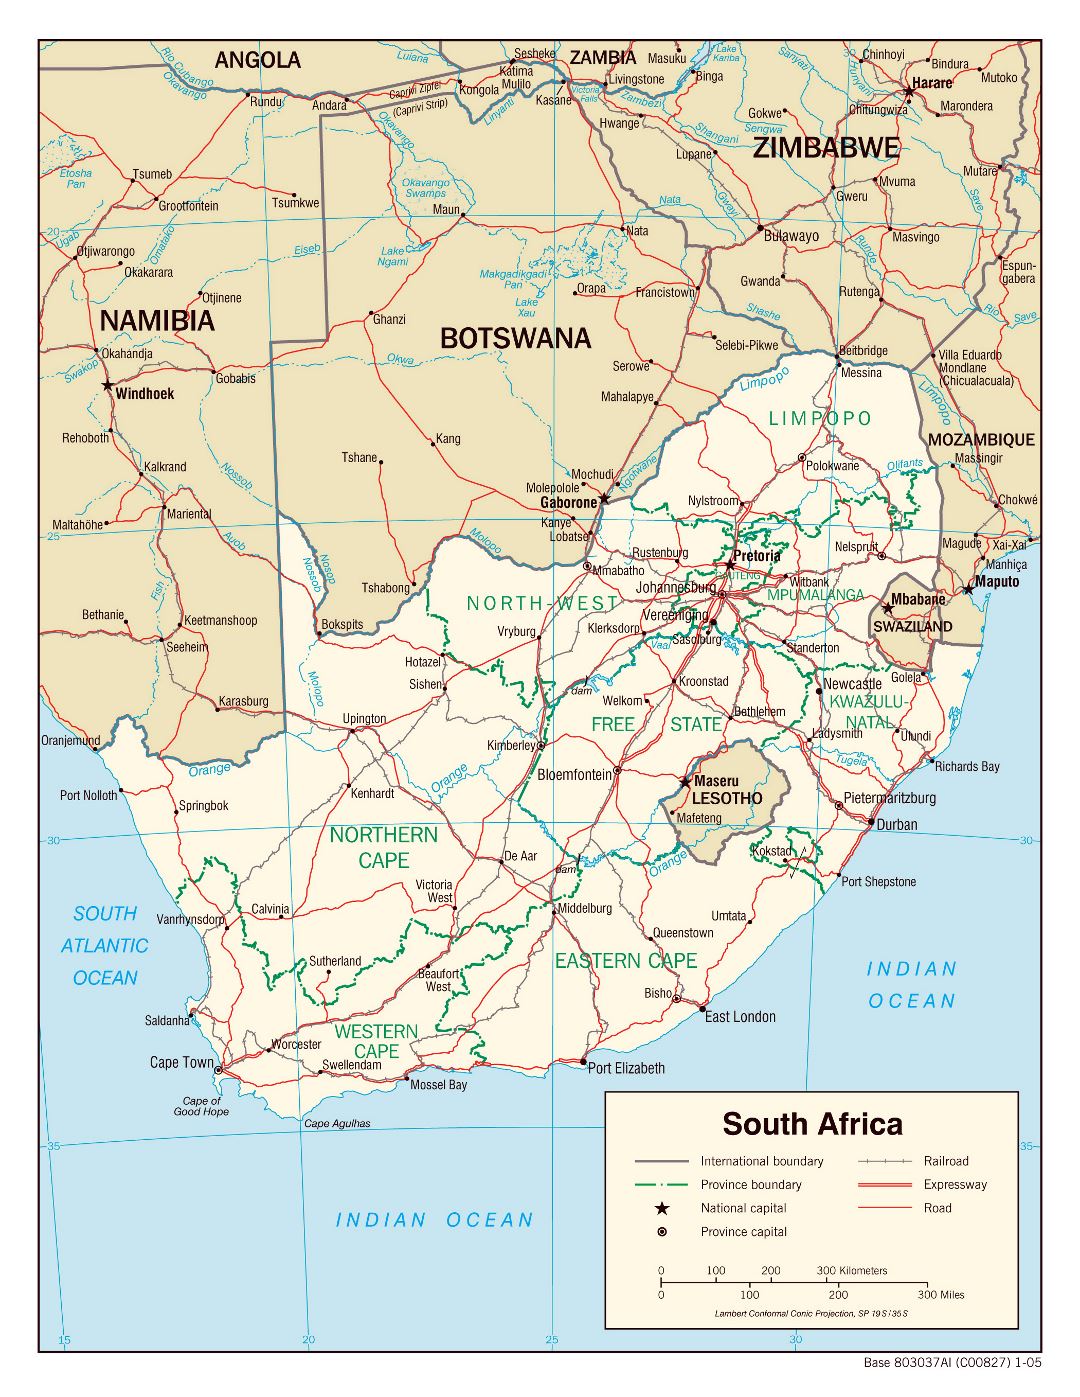 Large political and administrative map of South Africa with roads, railroads and major cities - 2005